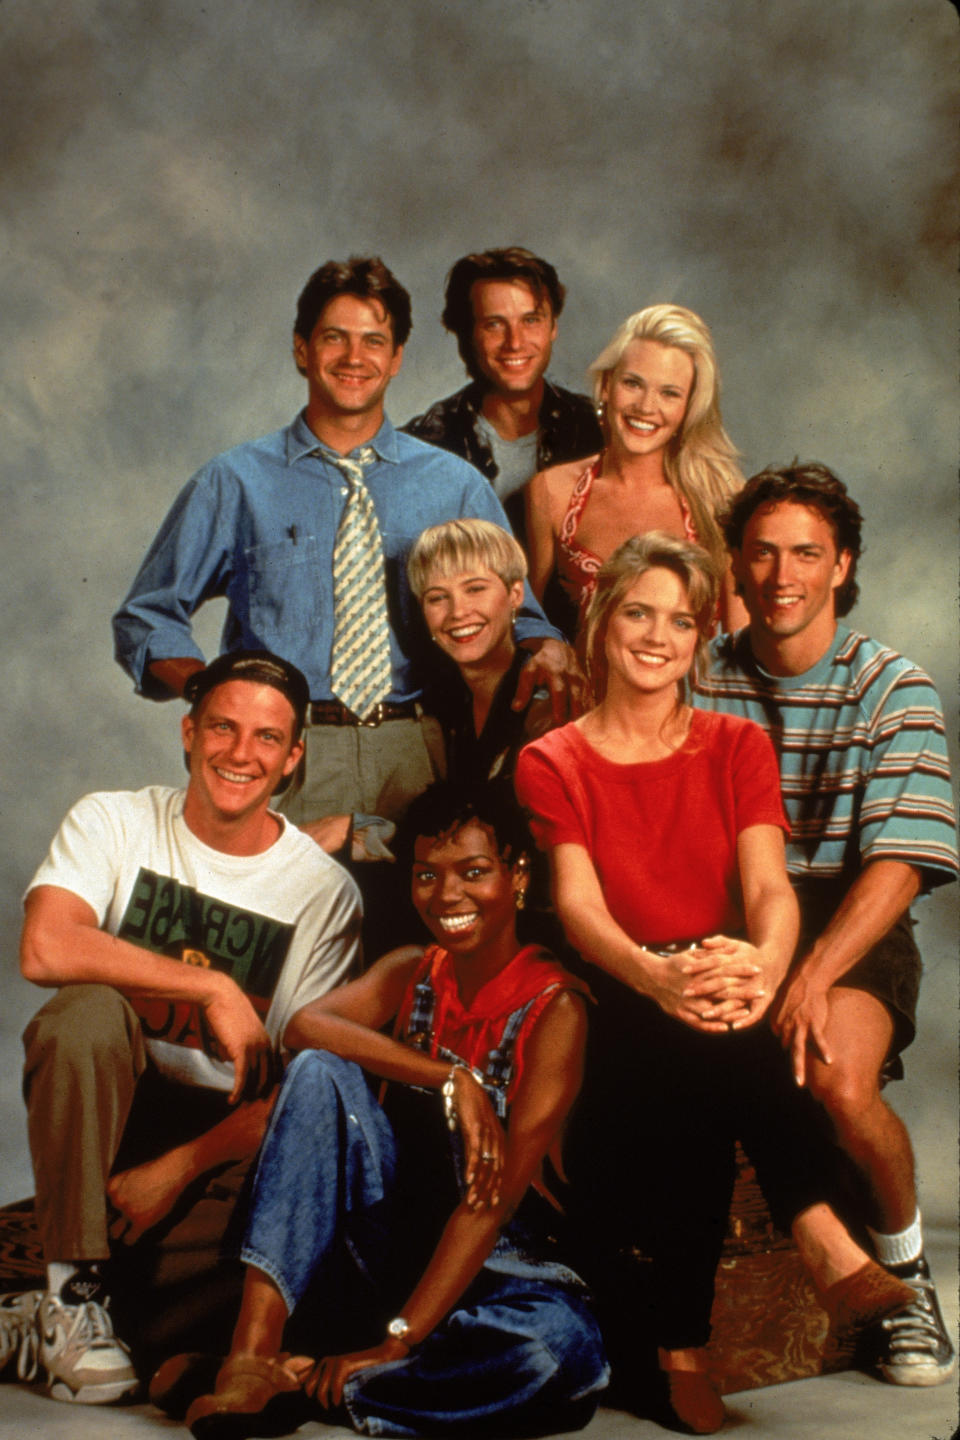 The main cast of Melrose Place stand and sit together smiling in a promotional shot from the early 90s